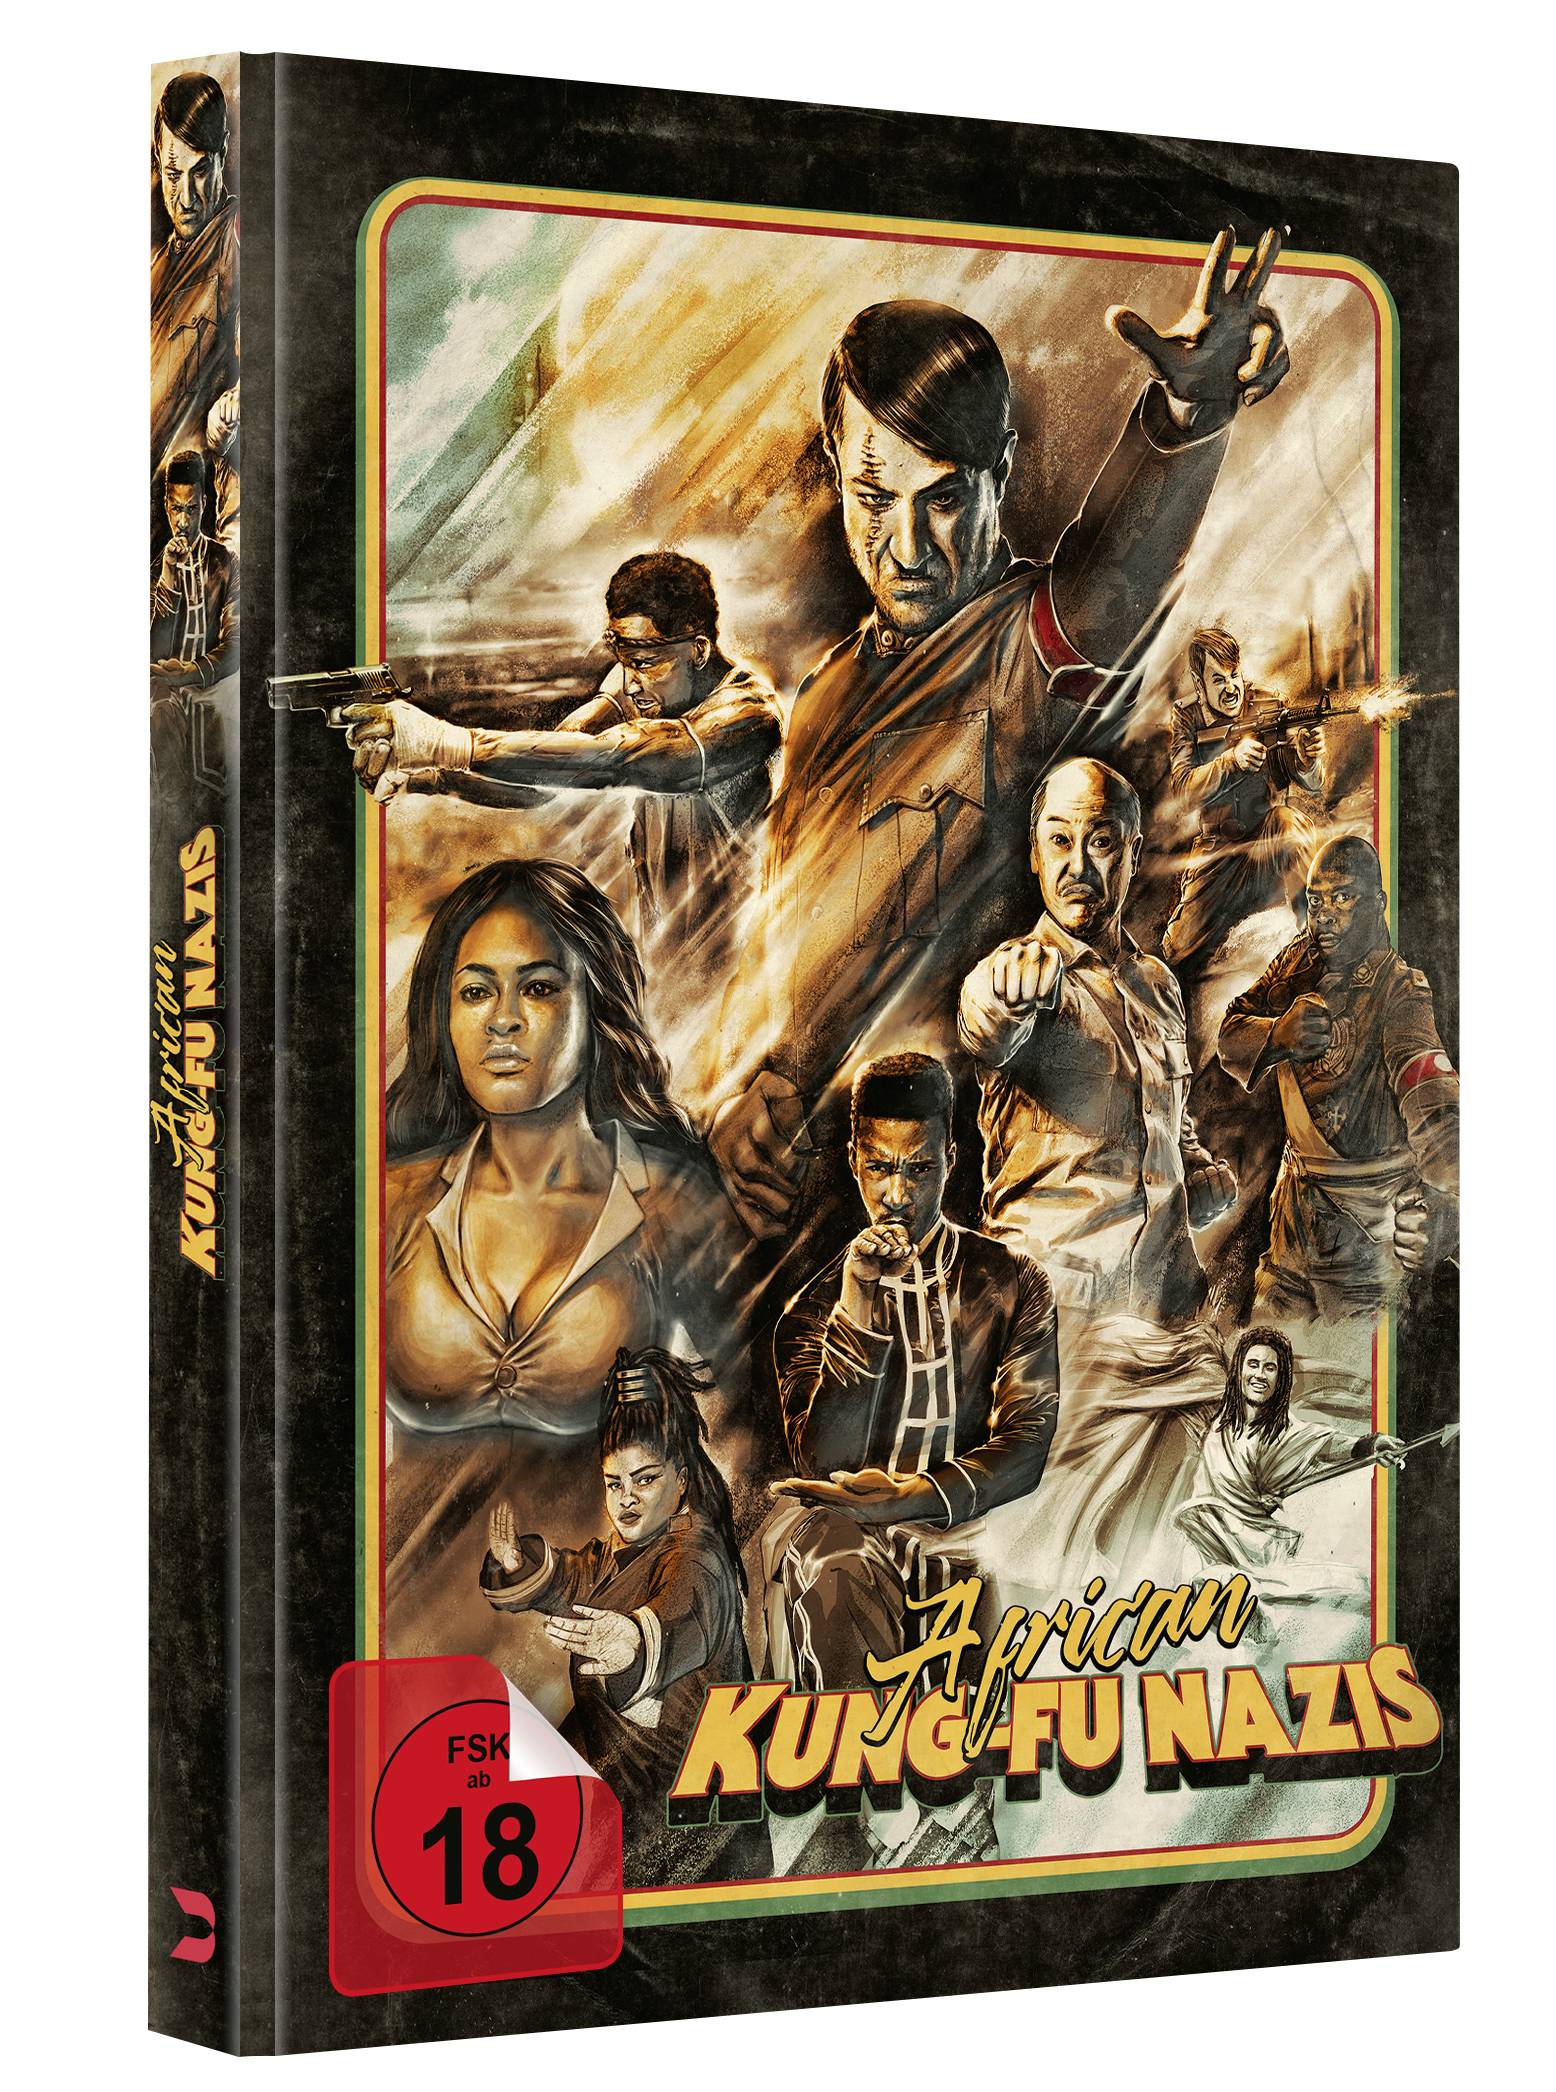 African Kung Fu Nazis - 2-Disc Limited Collector's Edition (Mediabook)